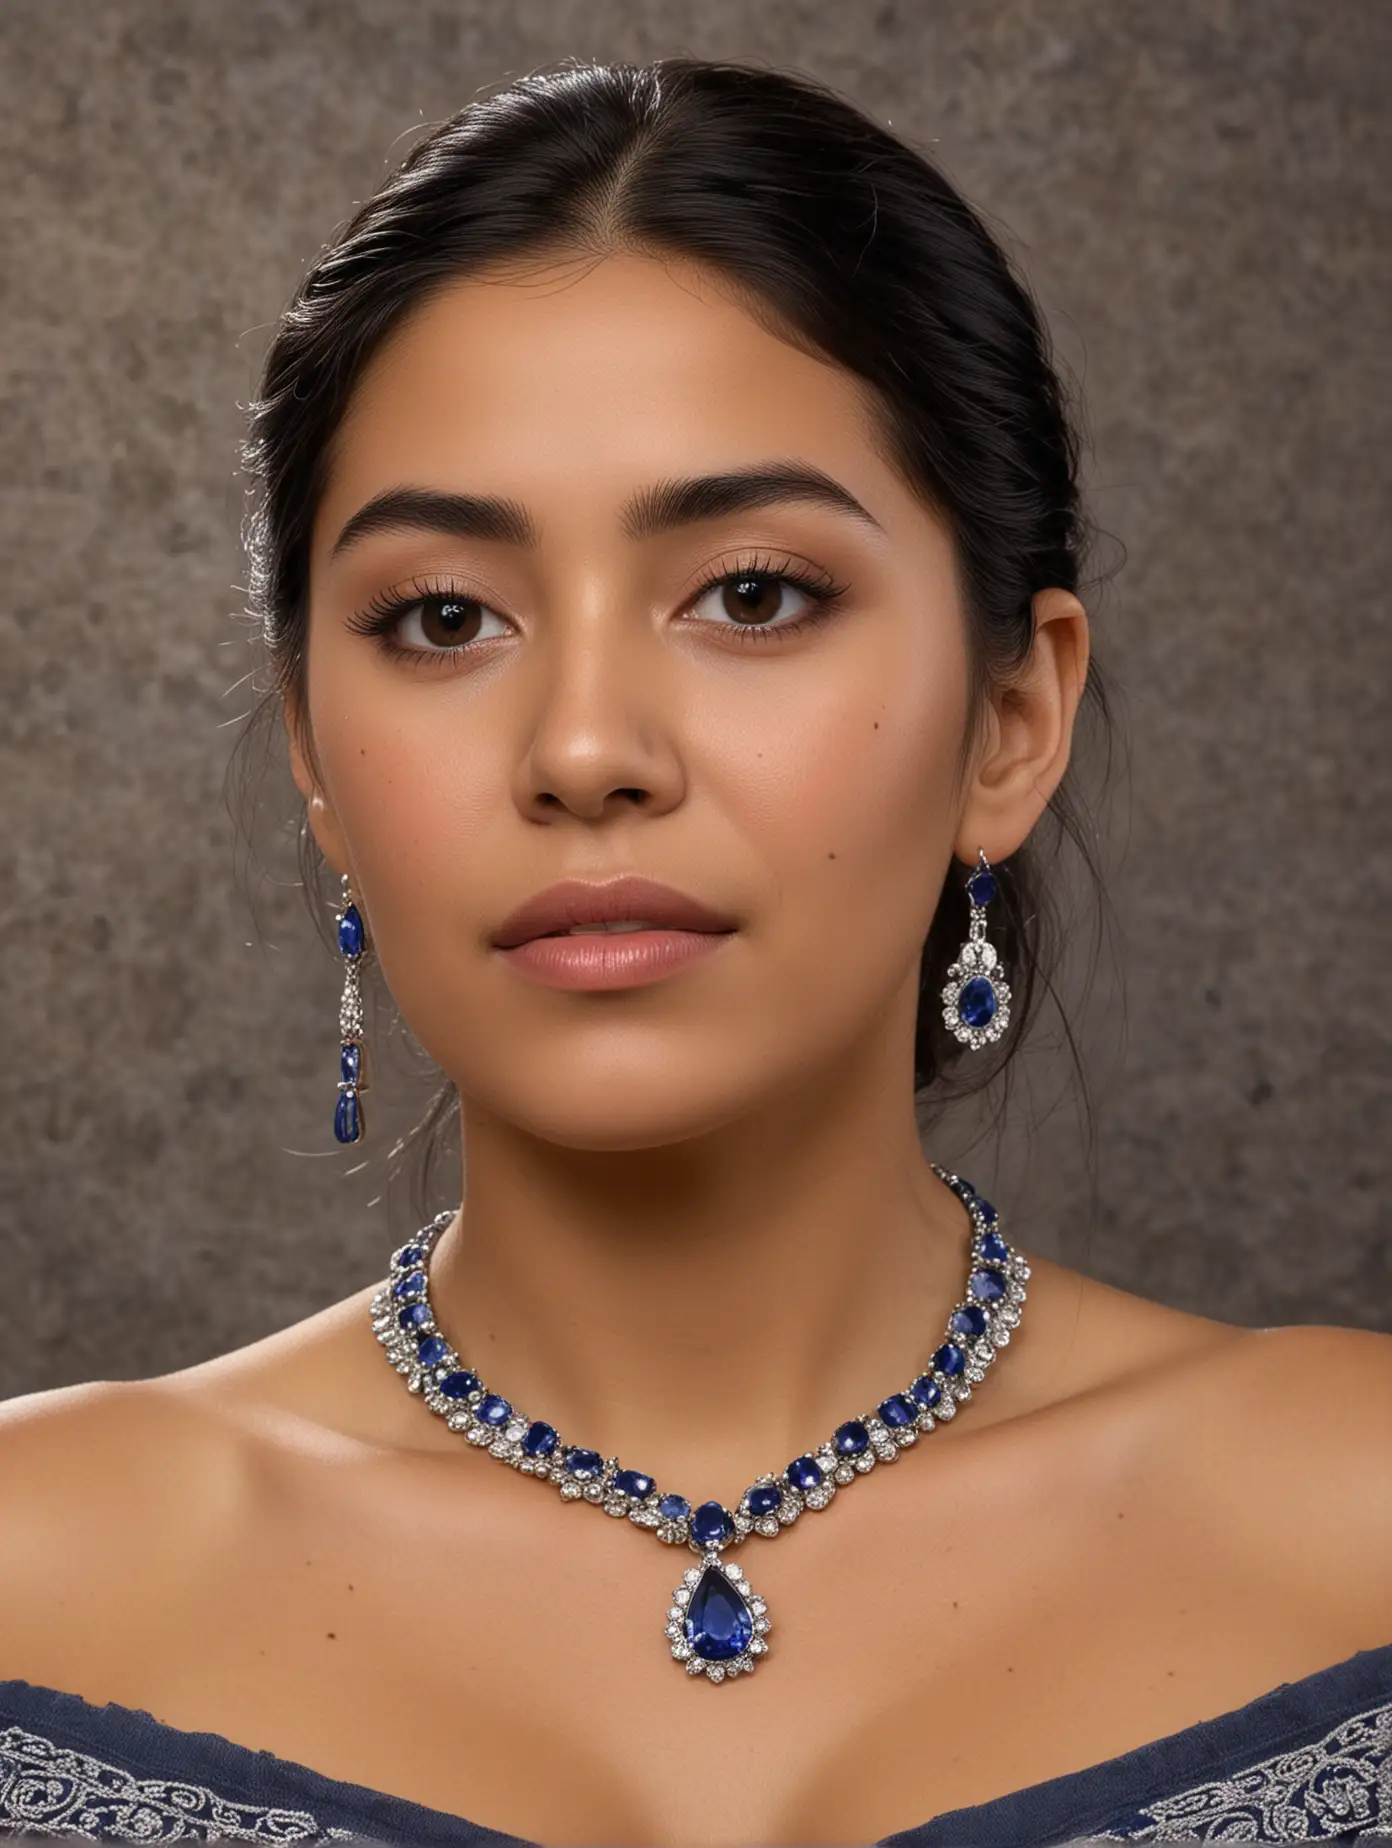 Elegant Mexican Woman Wearing Sapphire Necklace